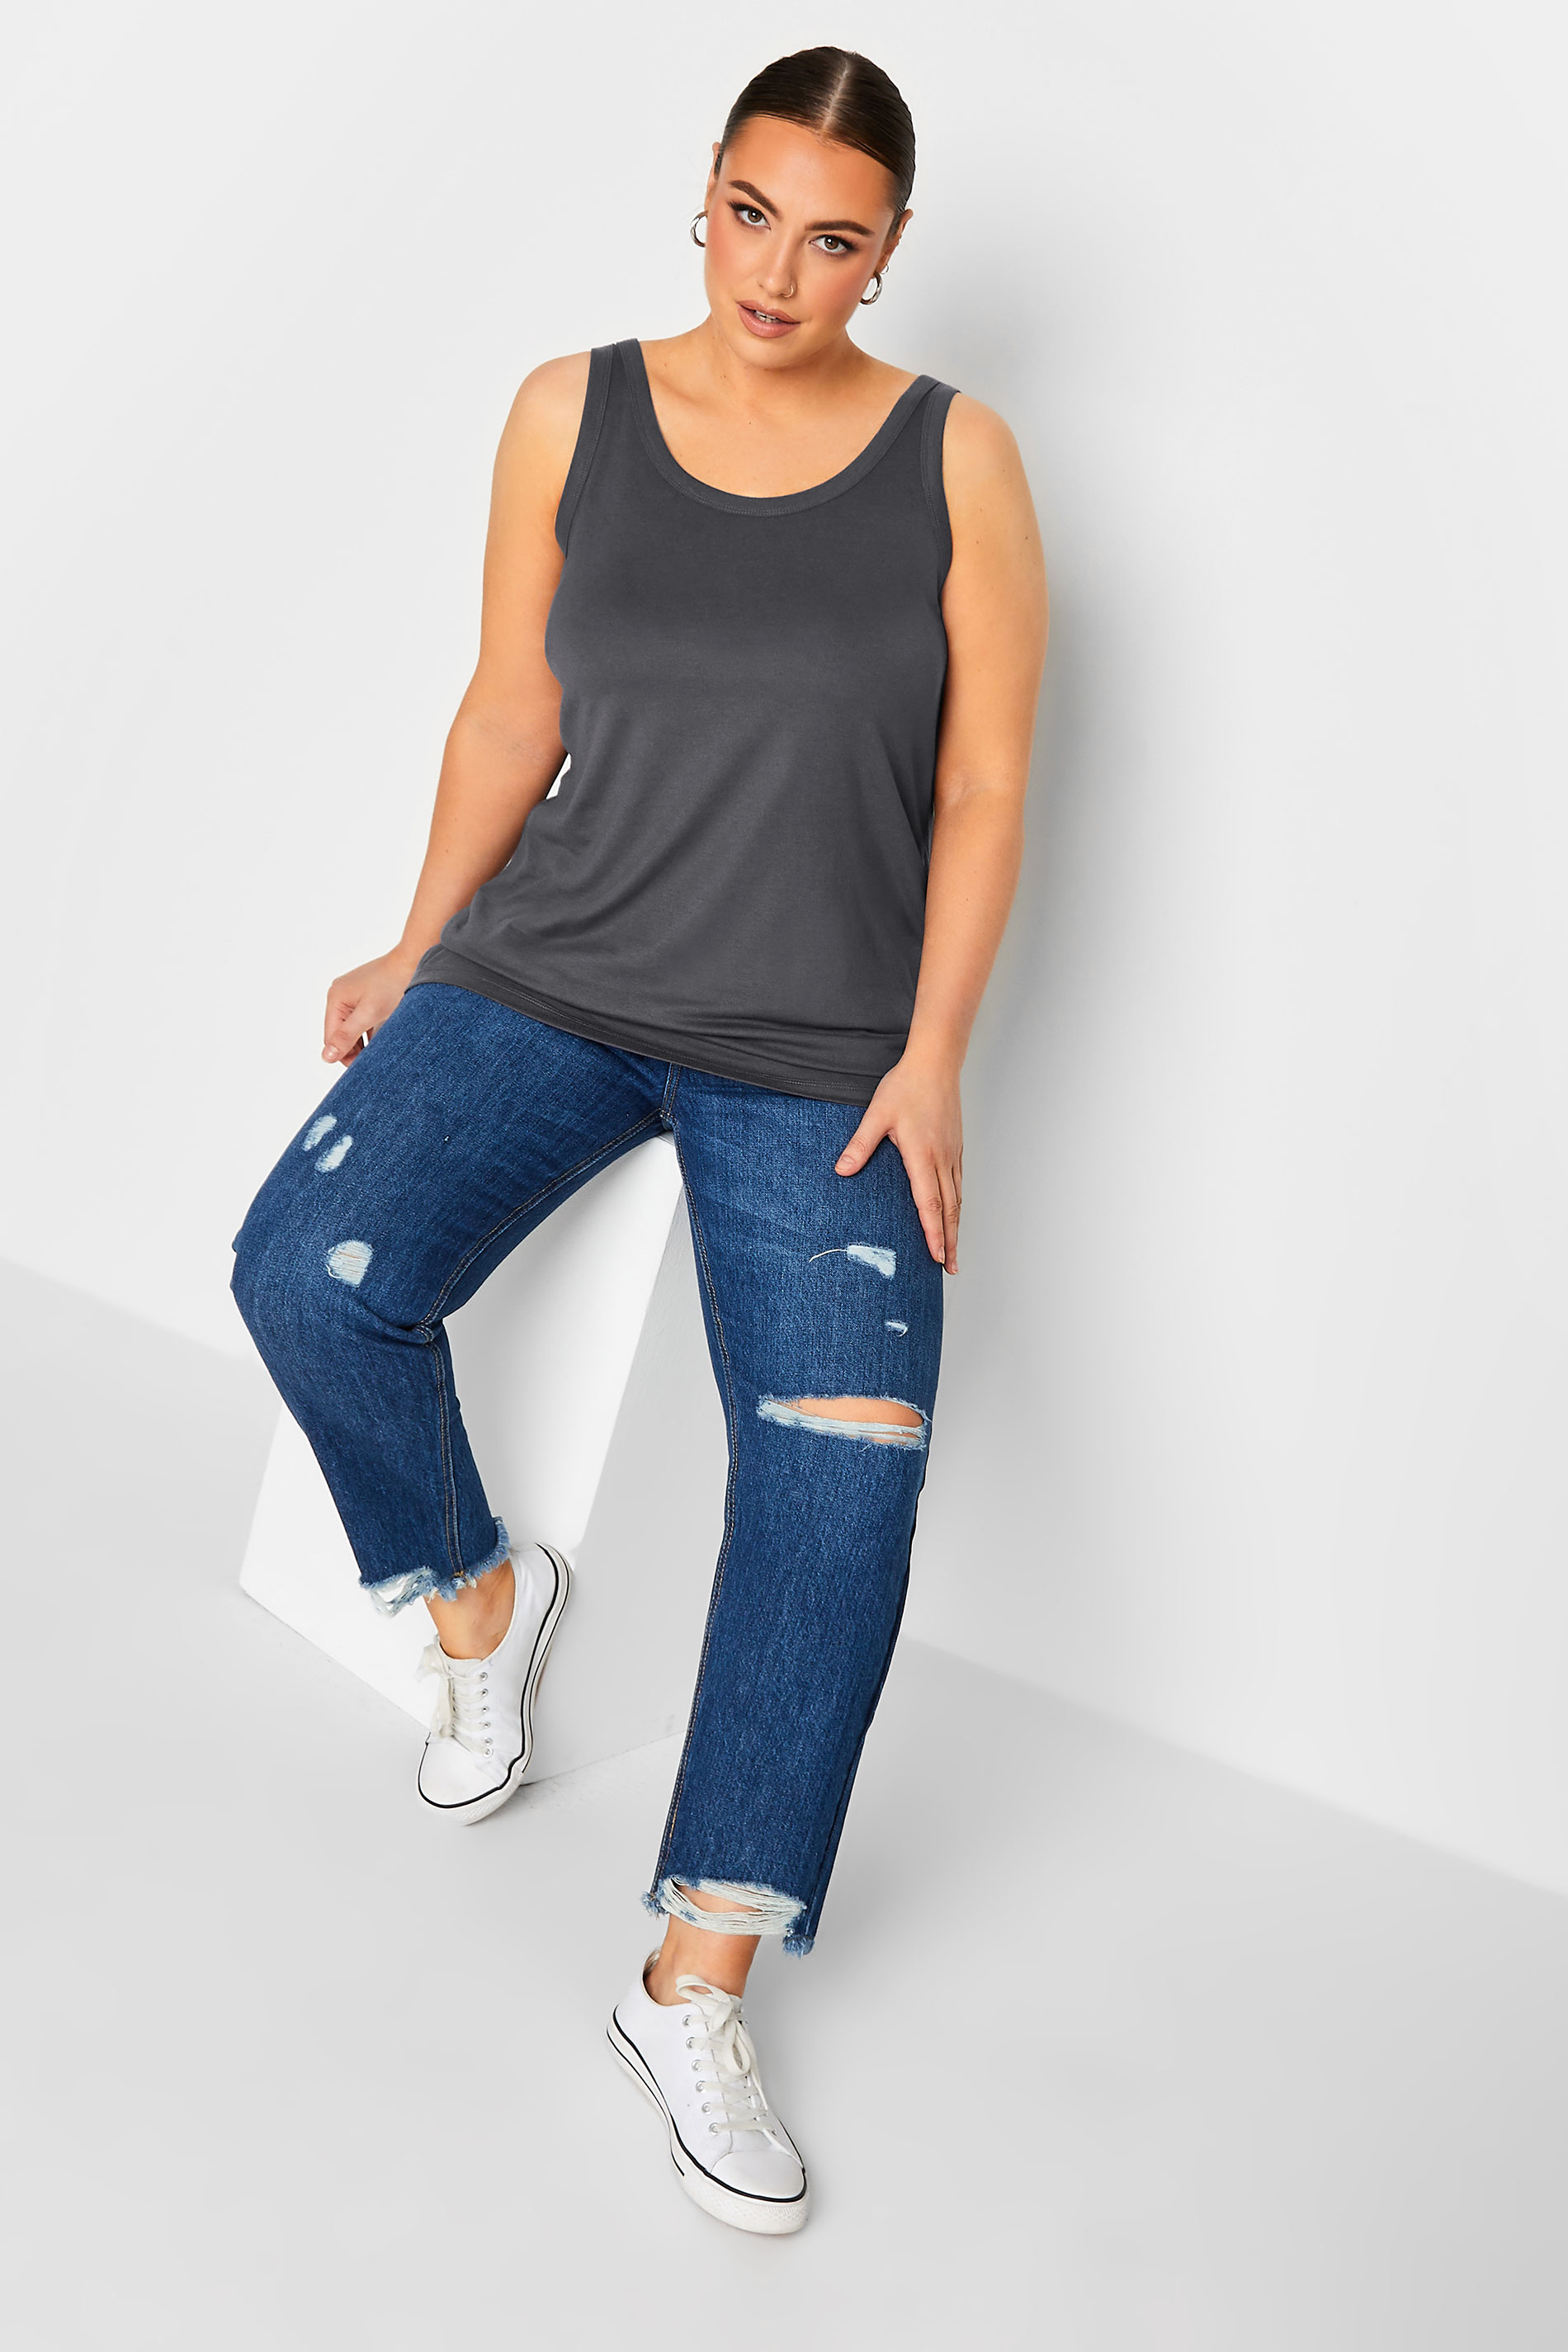 YOURS Plus Size Charcoal Grey Essential Vest Top | Yours Clothing  2